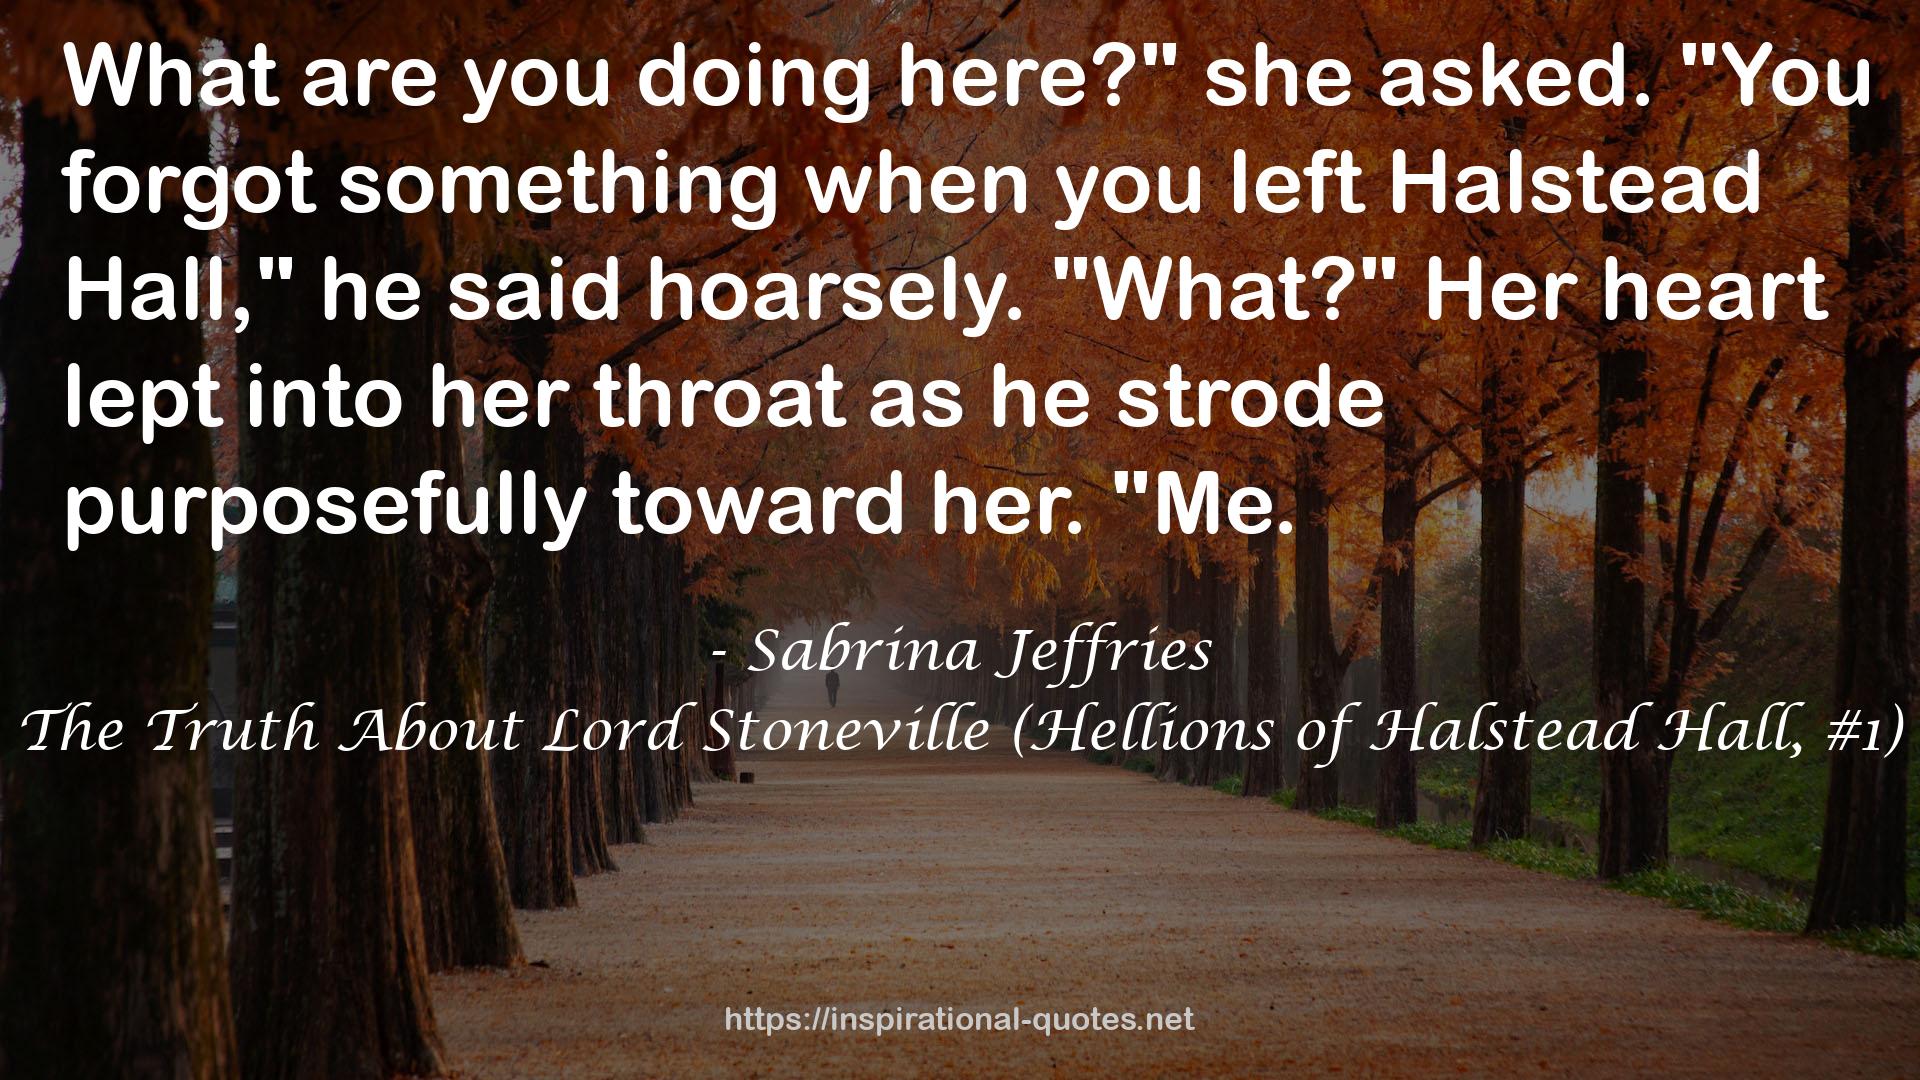 The Truth About Lord Stoneville (Hellions of Halstead Hall, #1) QUOTES